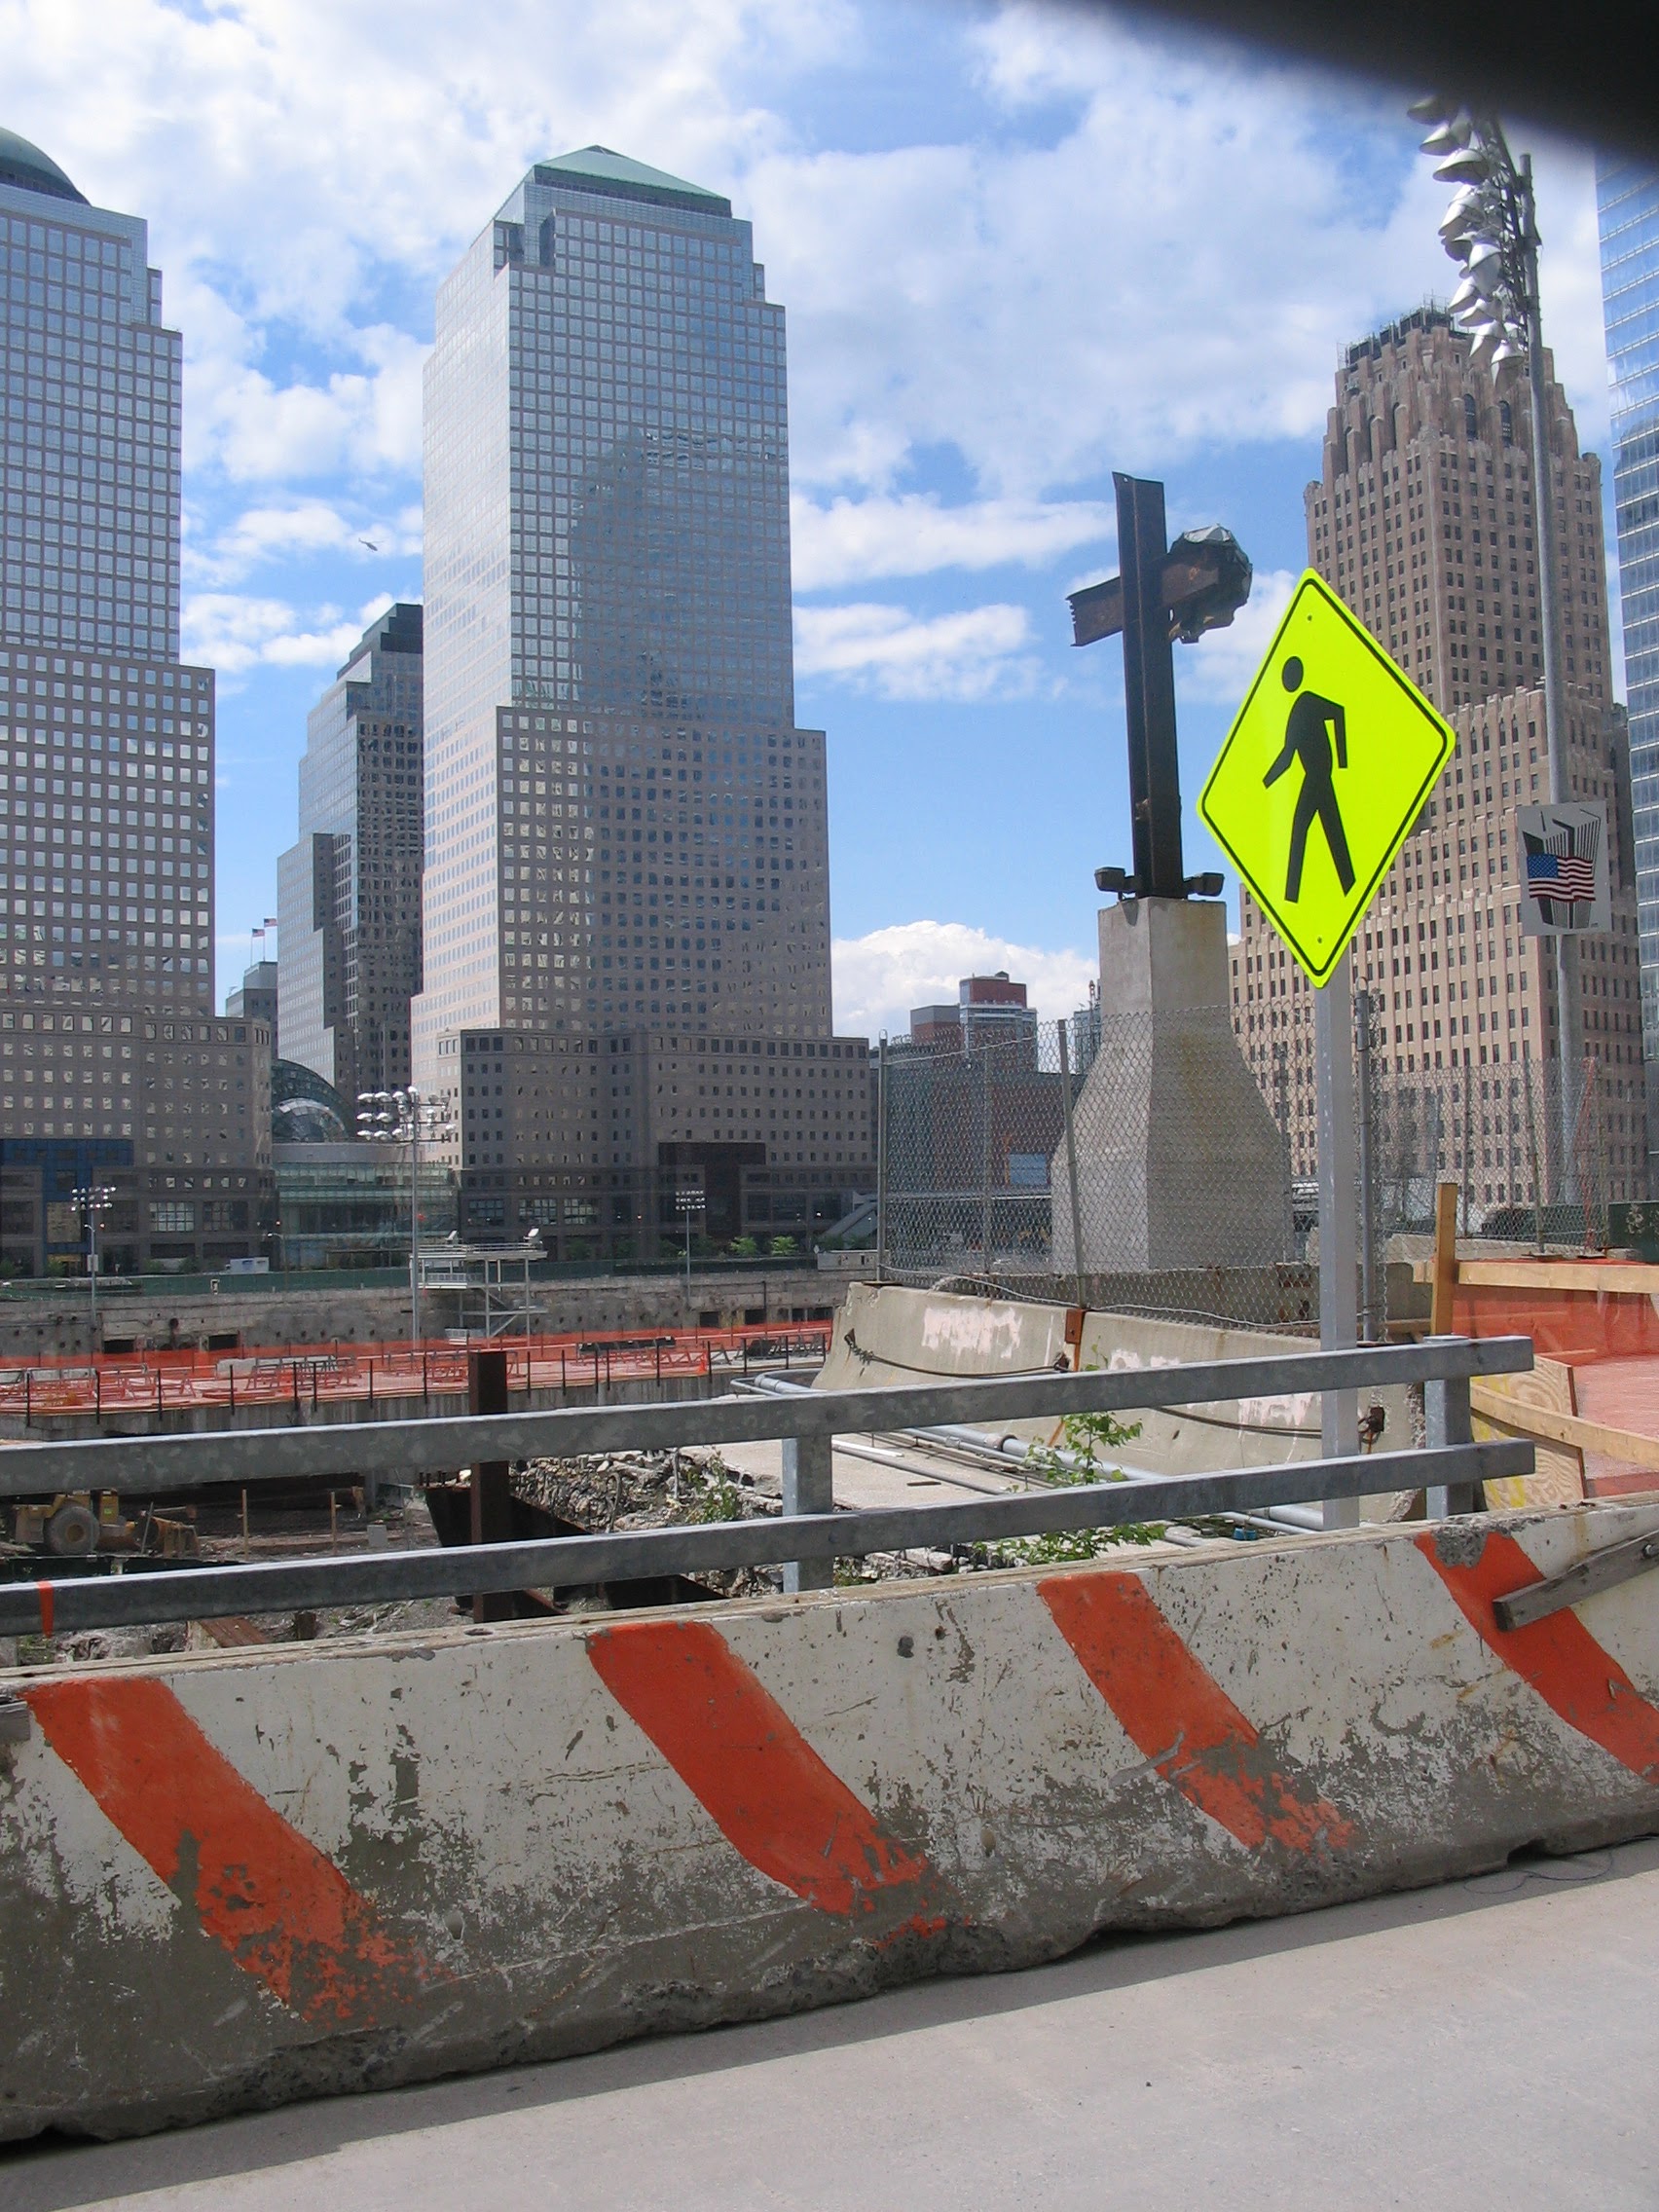 Picture of the World Trade Center site from 2006, specifically the "Ground Zero Cross"